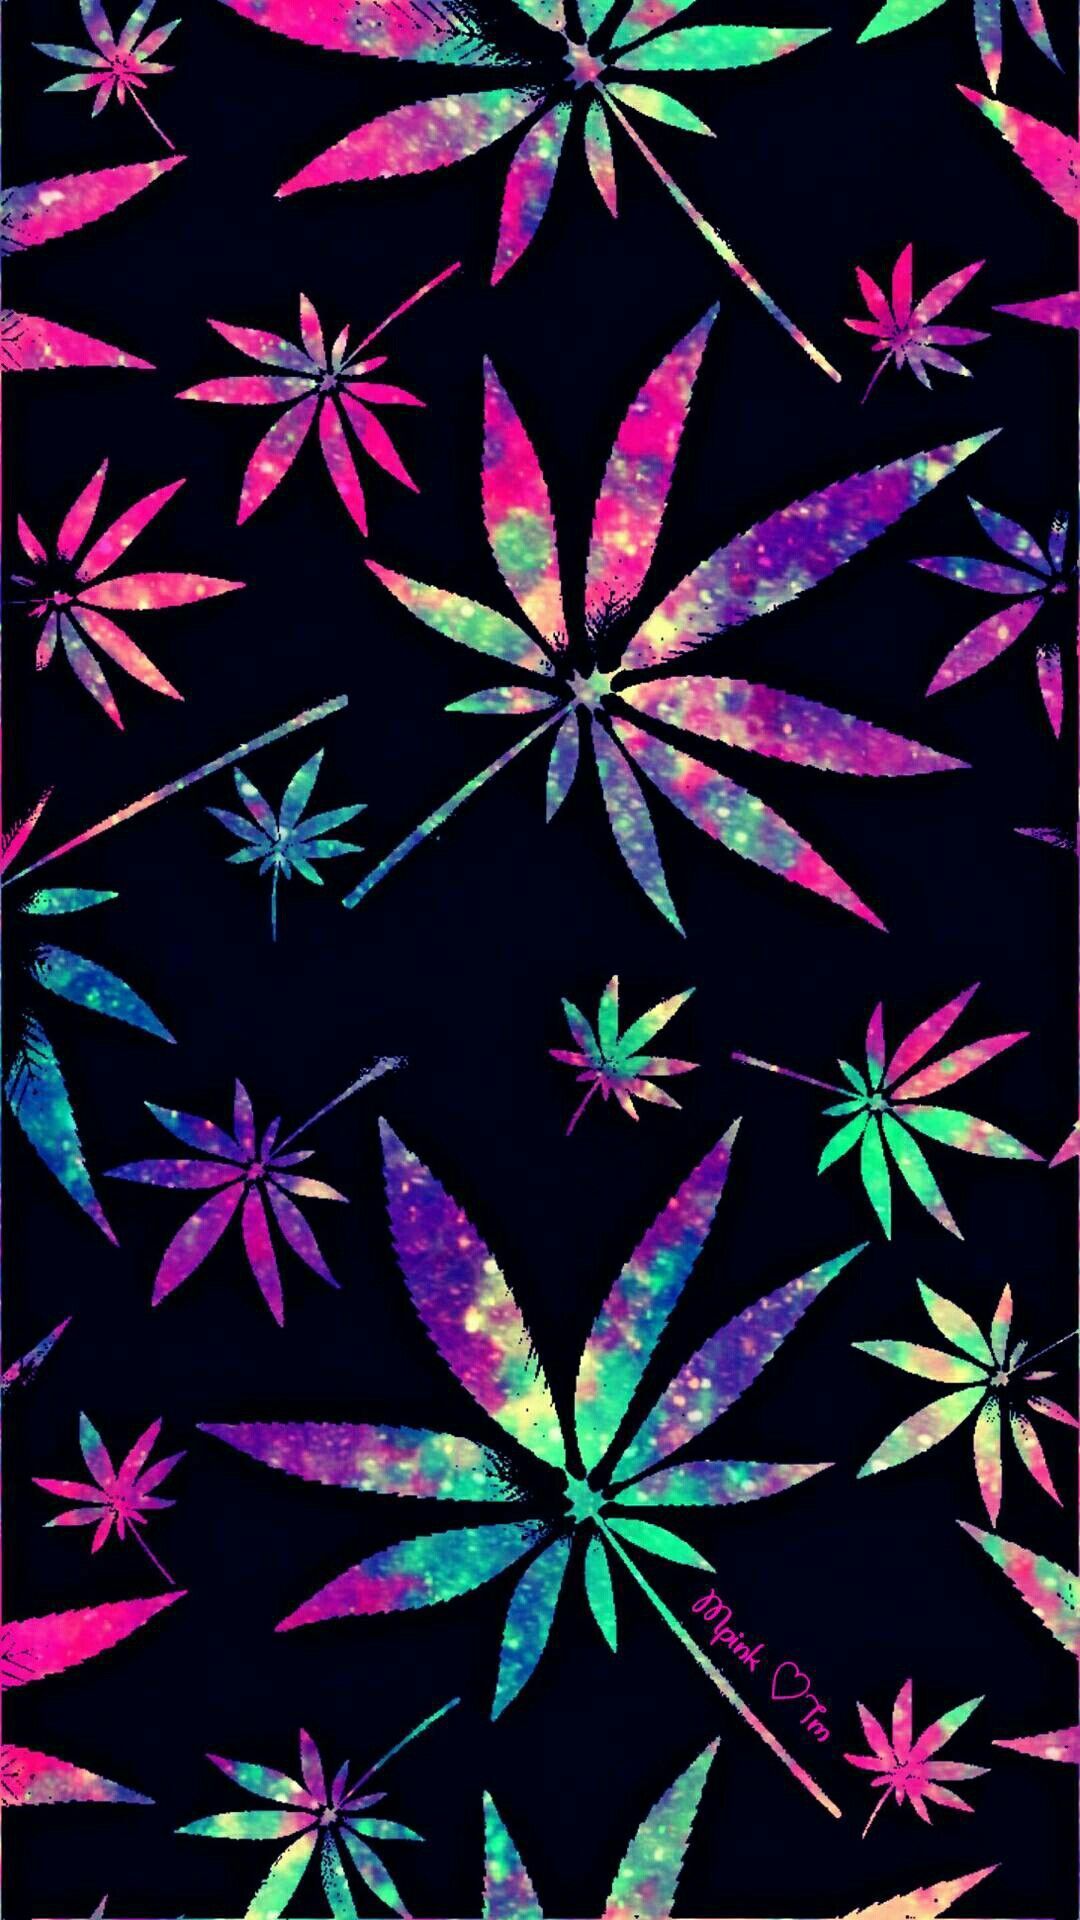 Weed iPhone Wallpaper Free Weed iPhone Background